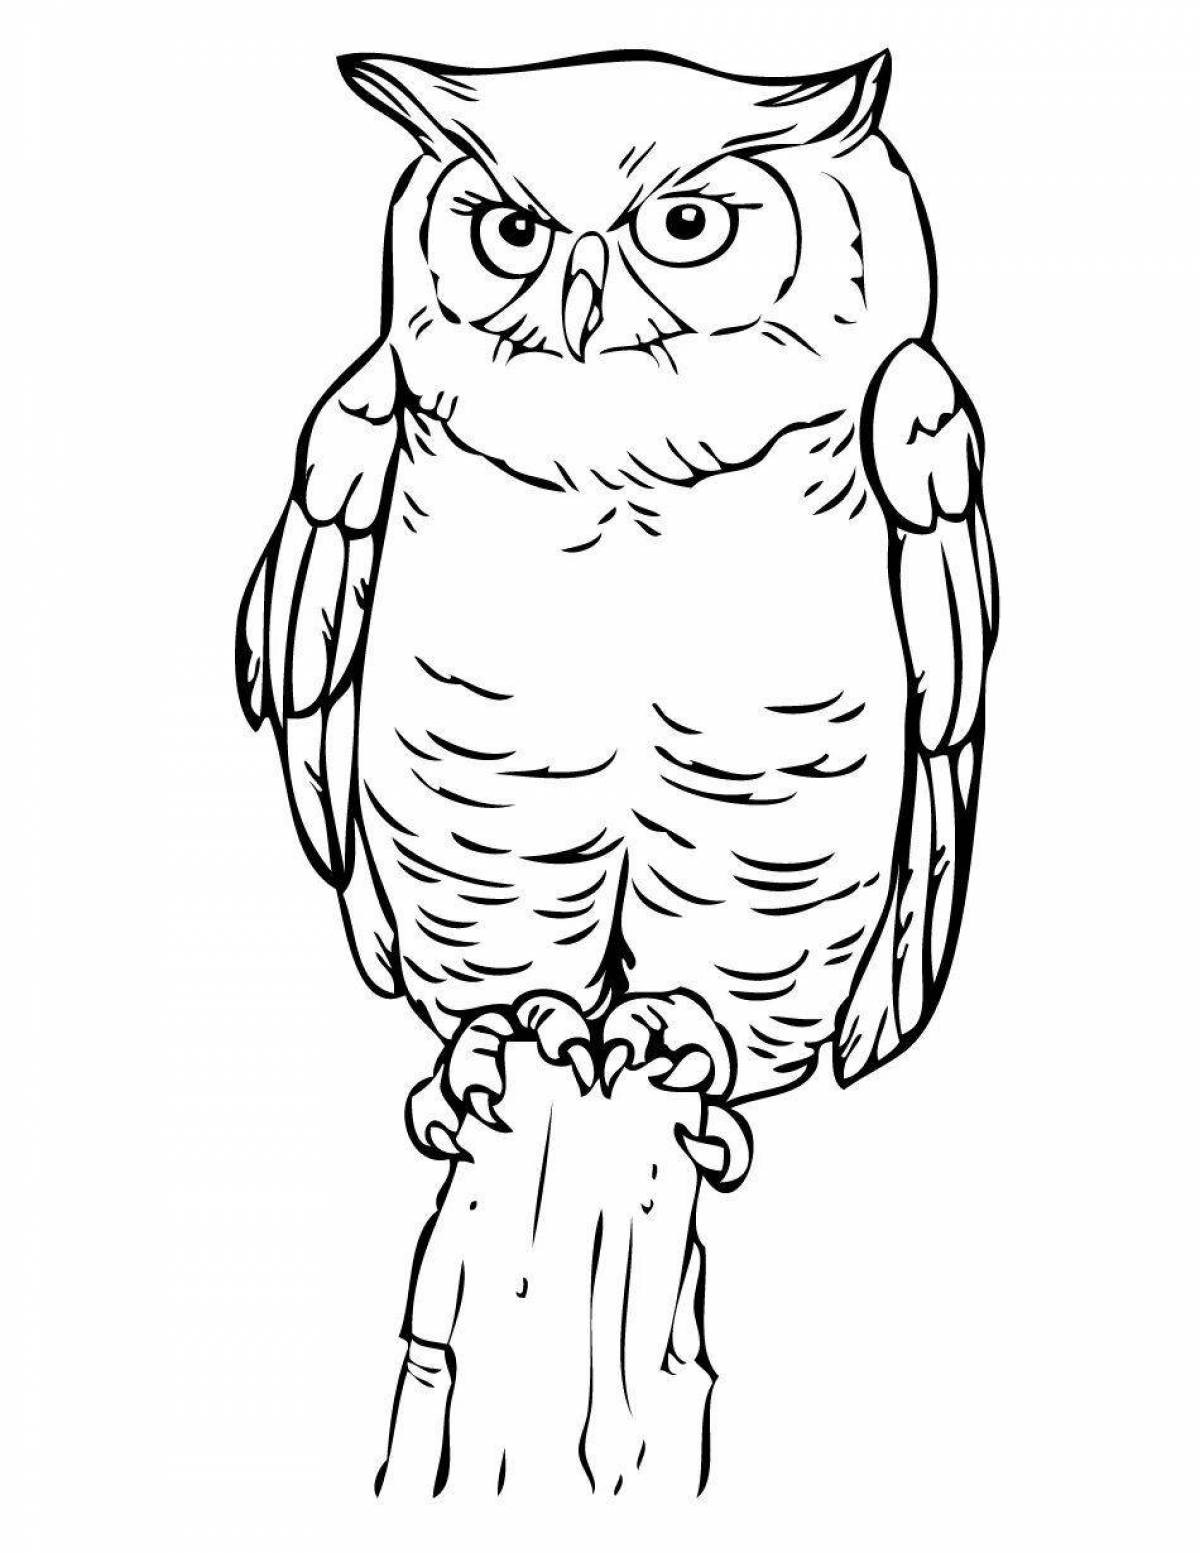 A funny owl coloring book for kids 6-7 years old